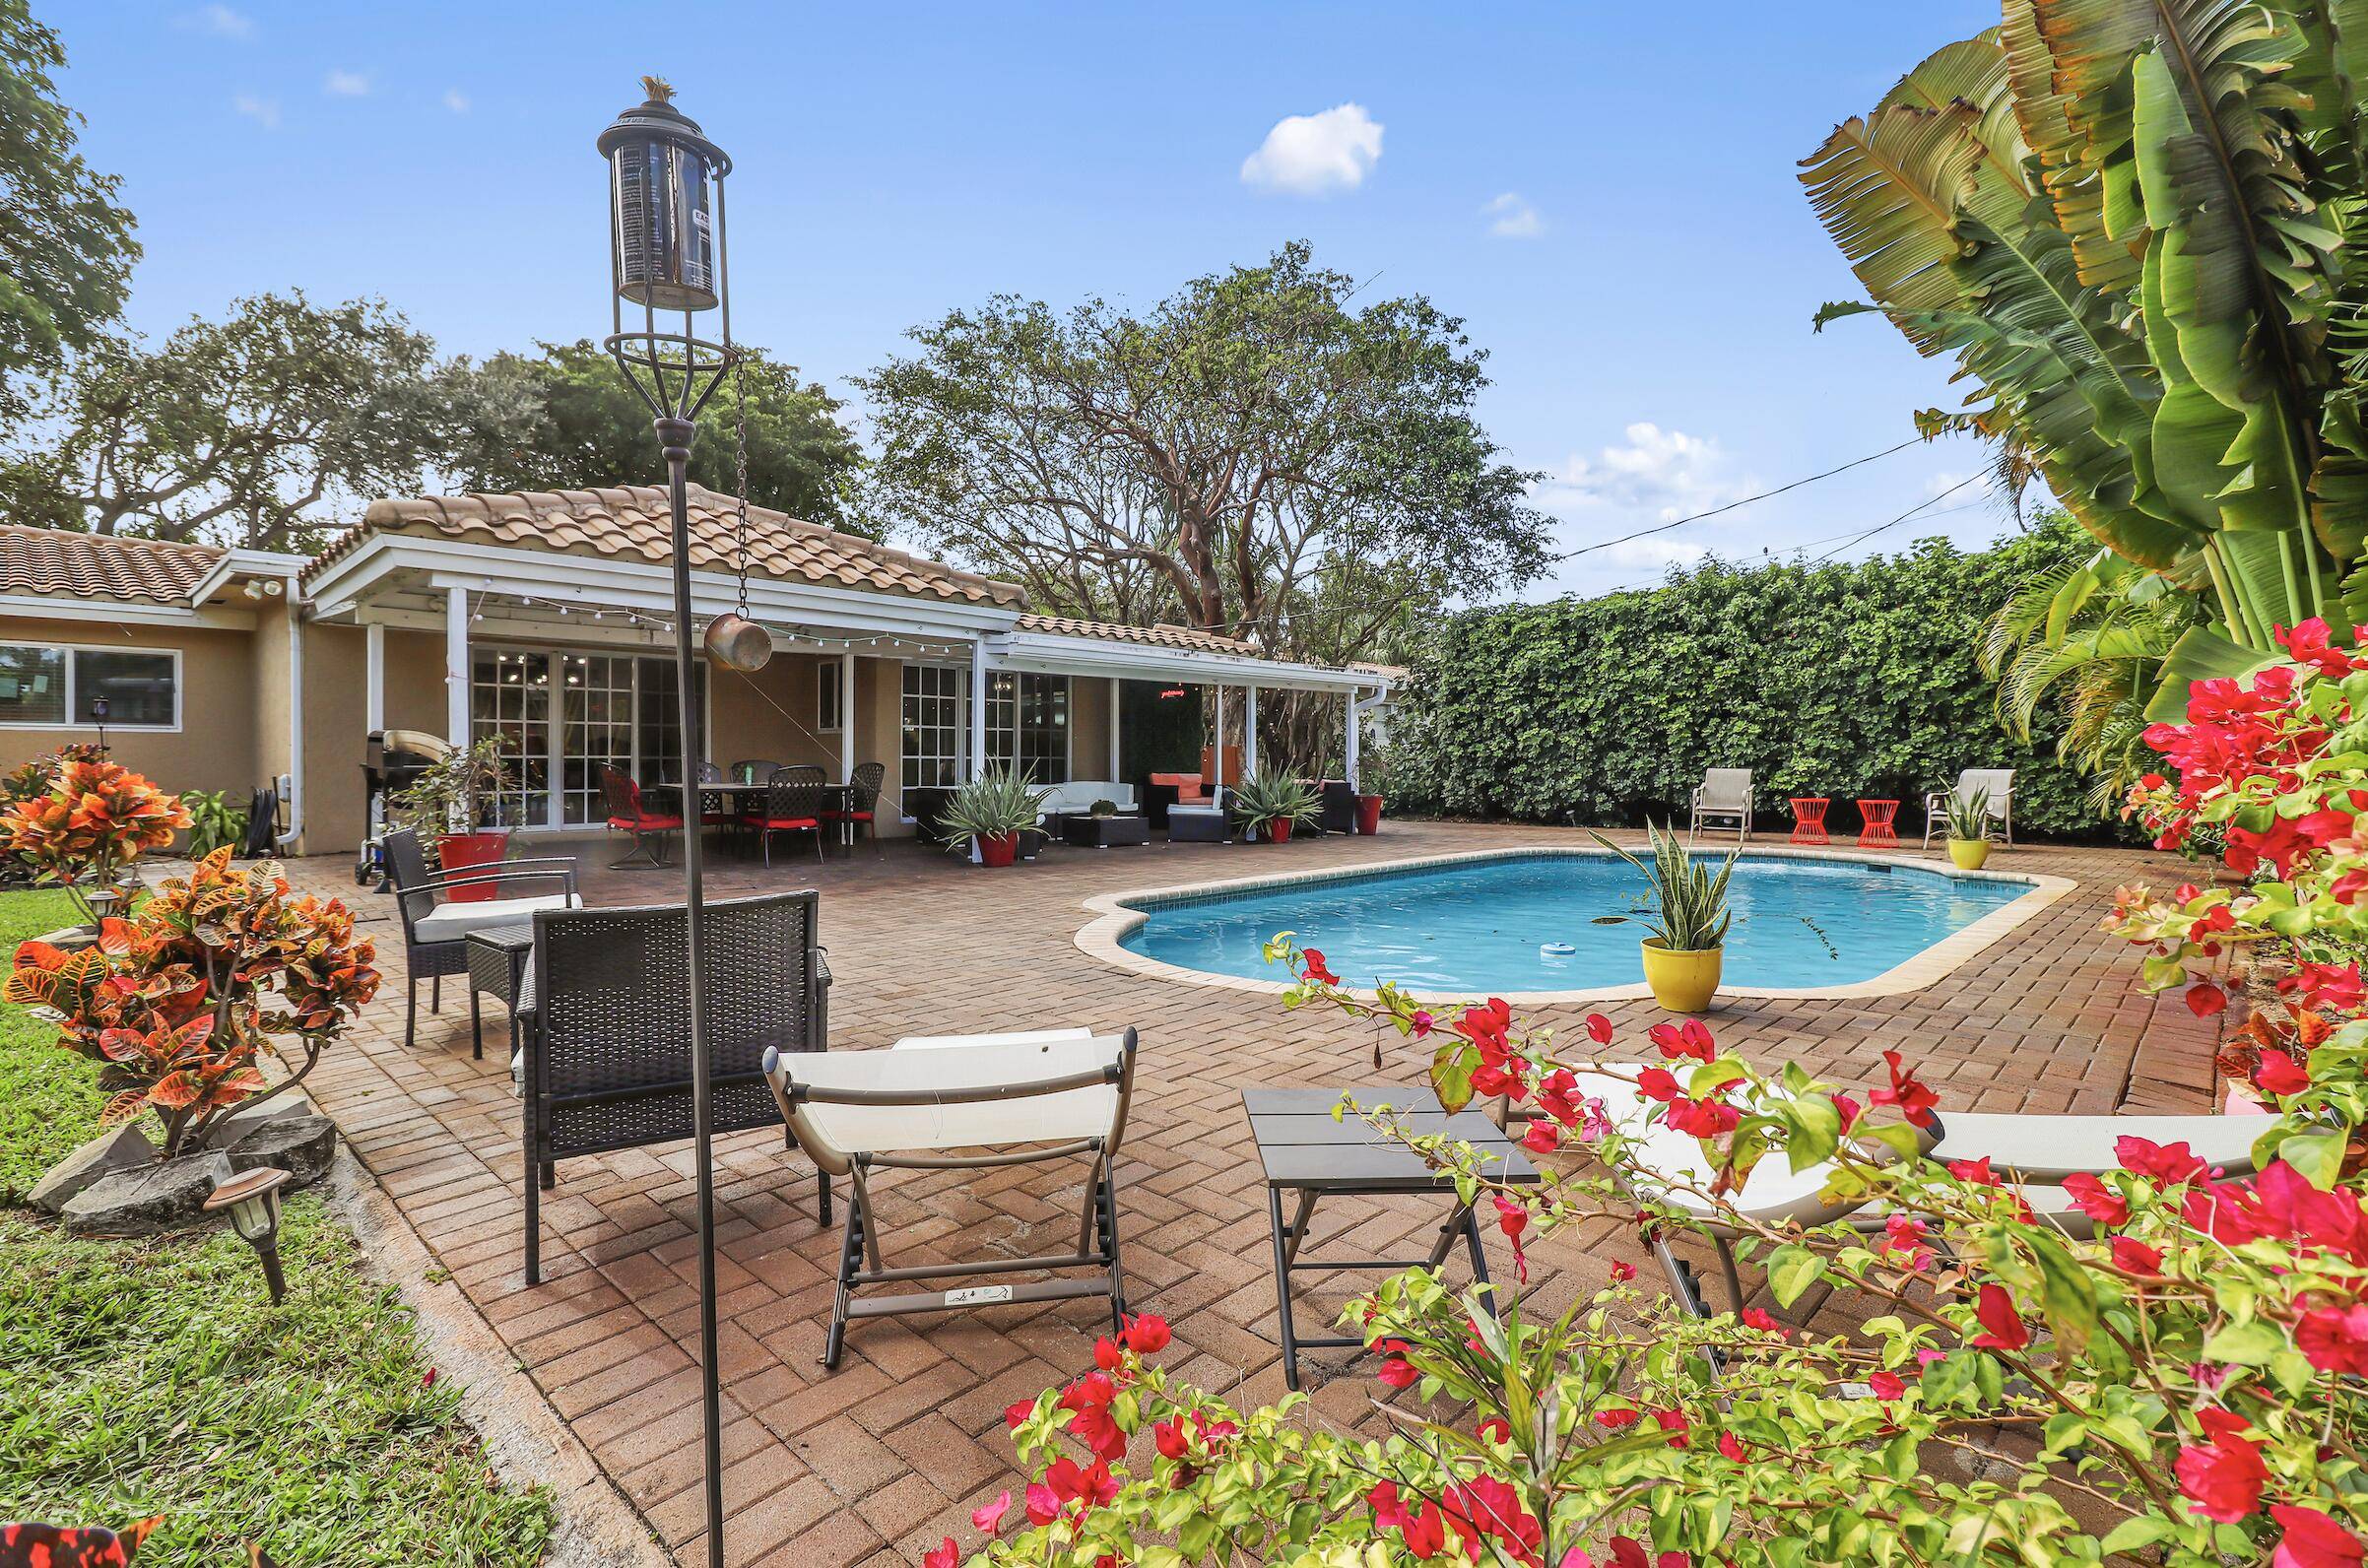 Discover luxury in Lighthouse Point, FL with this exquisite 4 bed, 3 bath home, featuring a heated pool and expansive backyard on a spacious 11, 929 sqft lot.